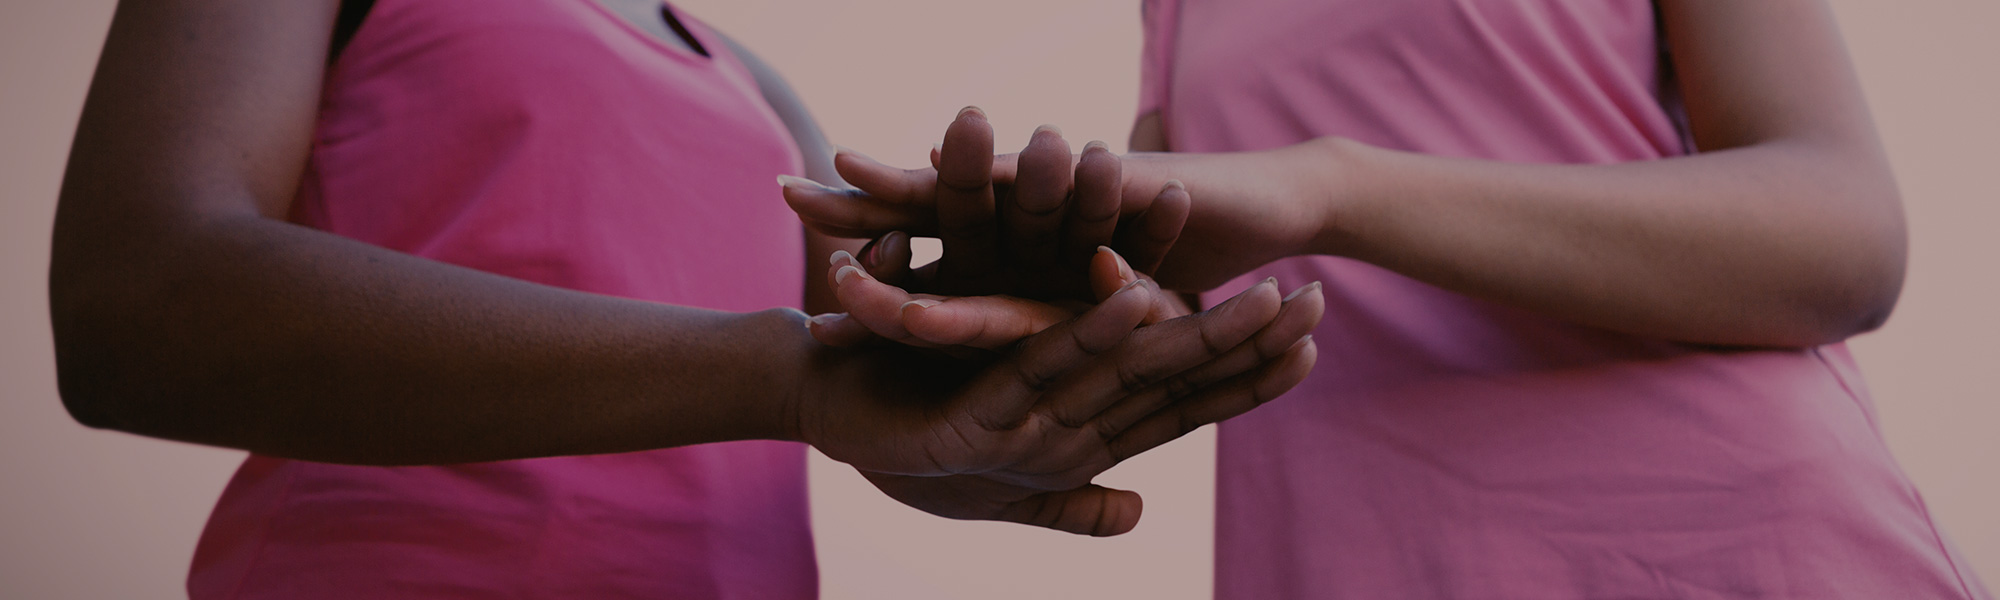 Two women in pink piling hands on top of each other